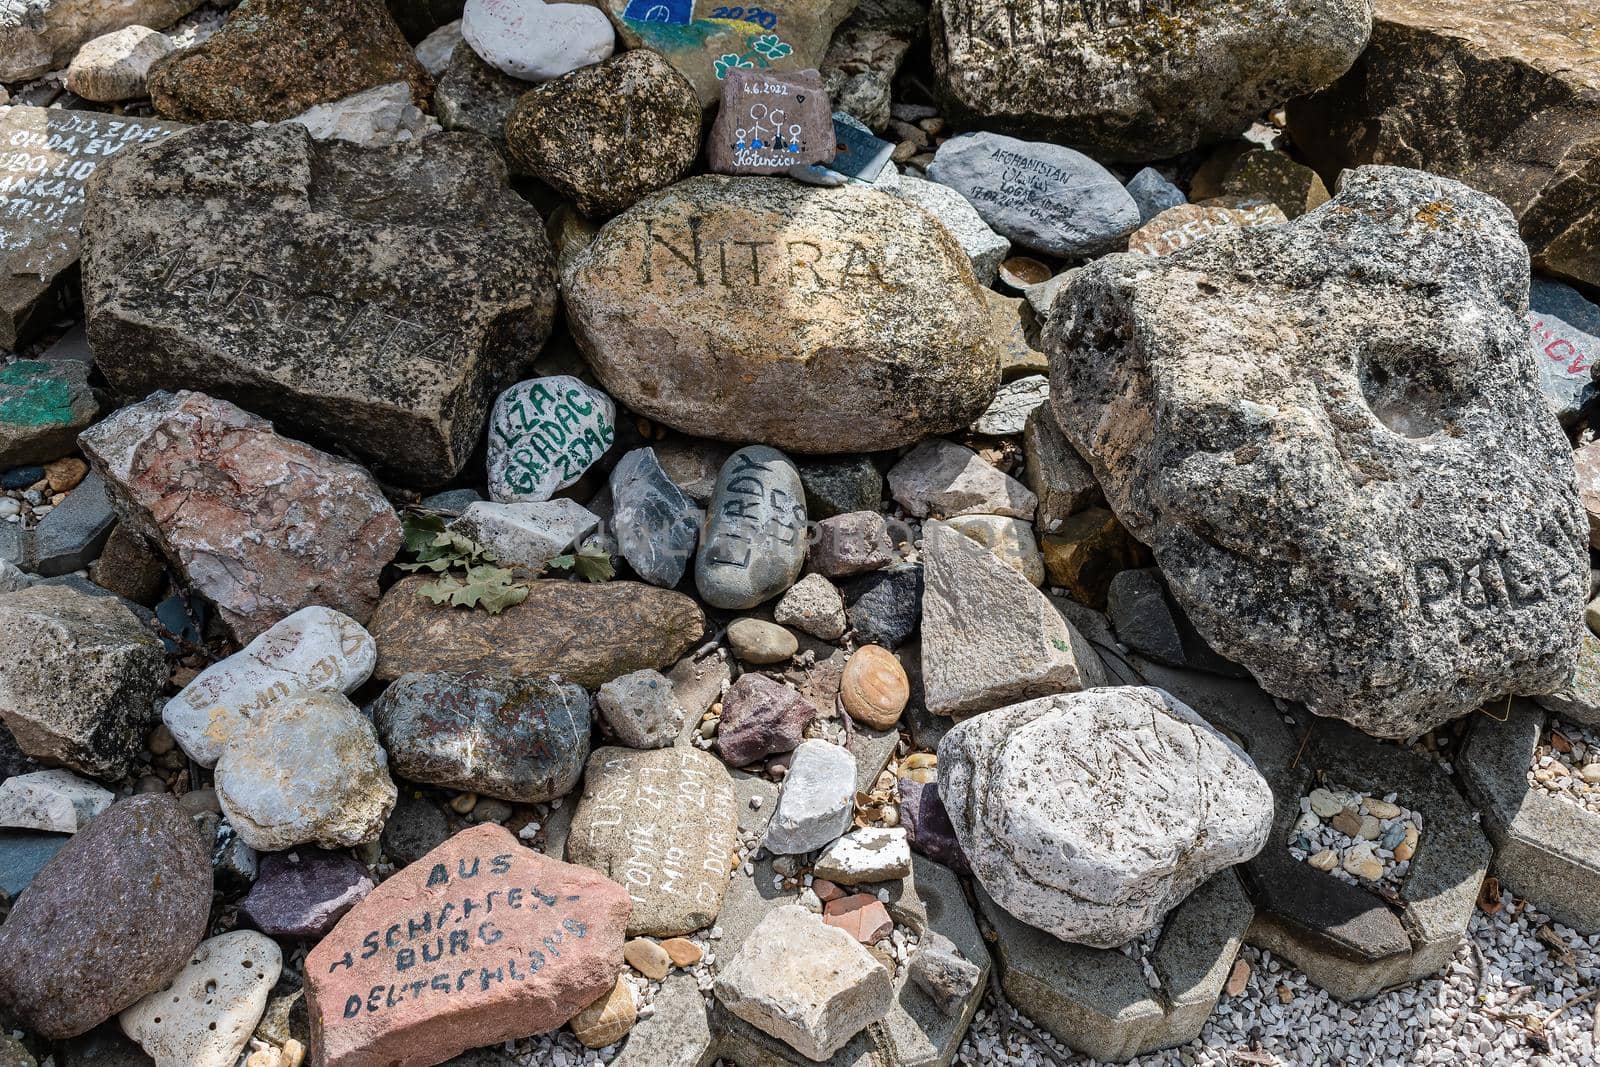 Ratiskovice, Czech Republic - July 7 - The mythical hill of Naklo near Ratiskovice. Stones with inscriptions from places from different parts of the world in a sweat place under the cross